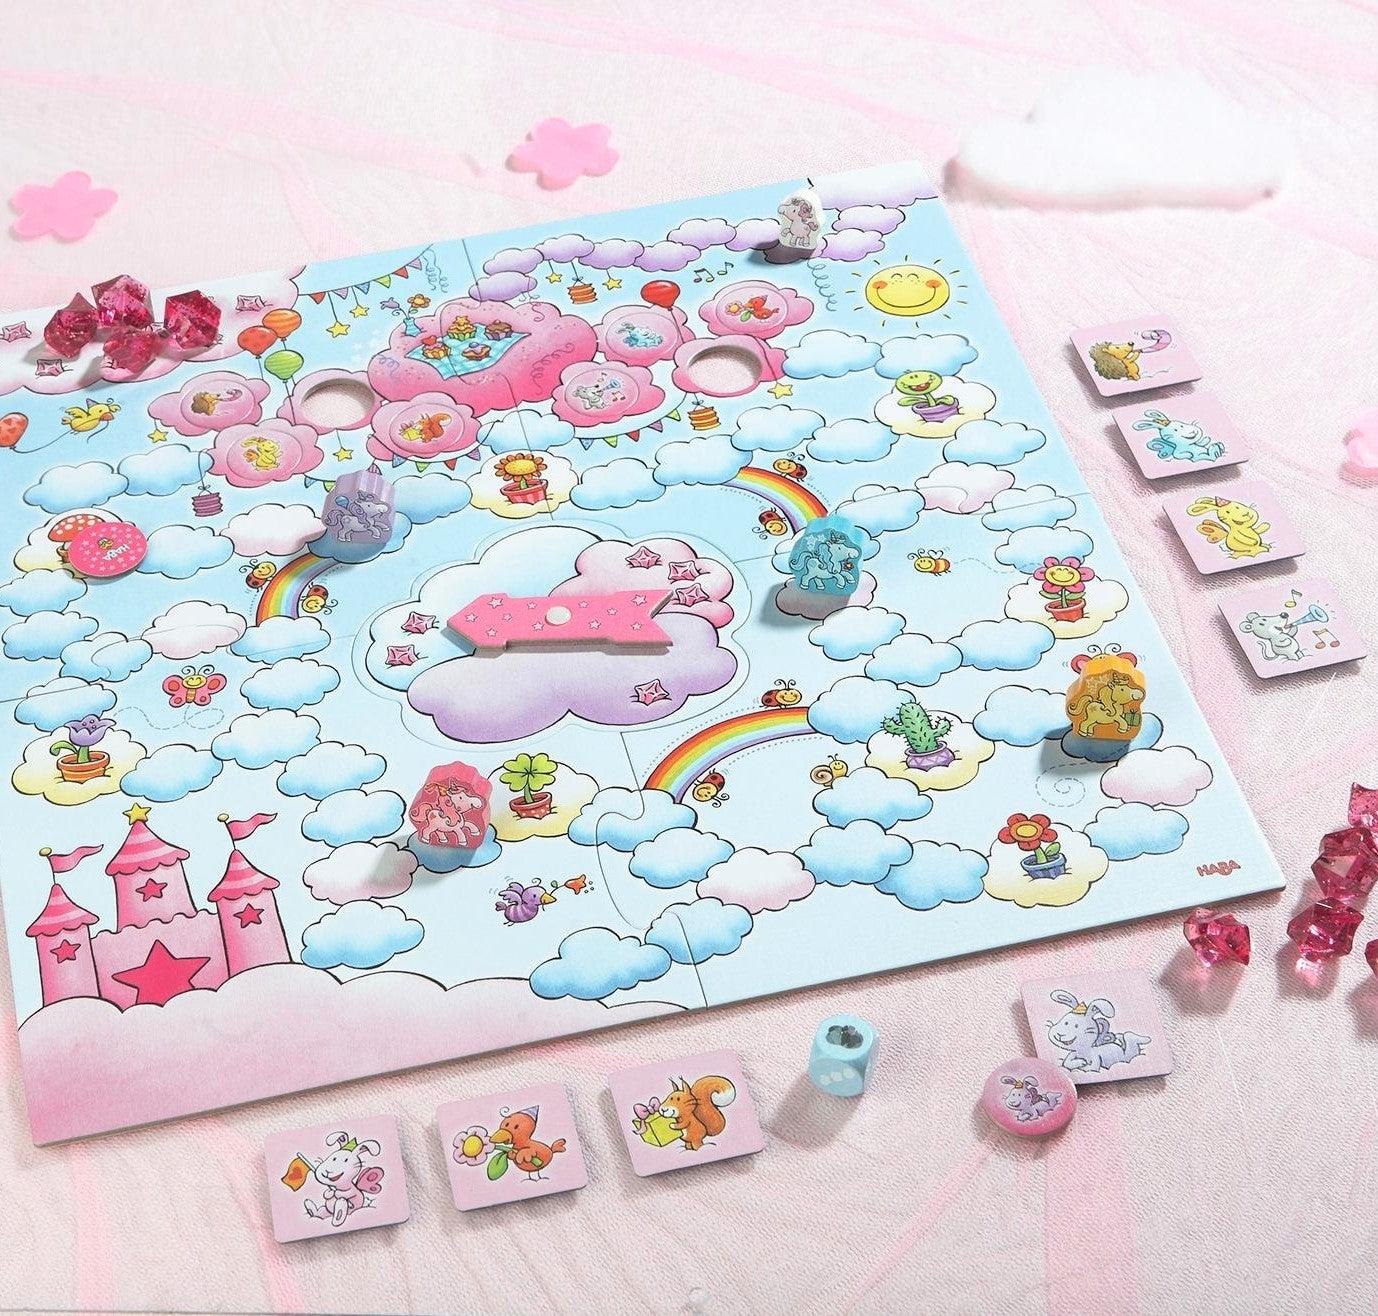 Haba: game unicorns in the clouds Party for Rosalie